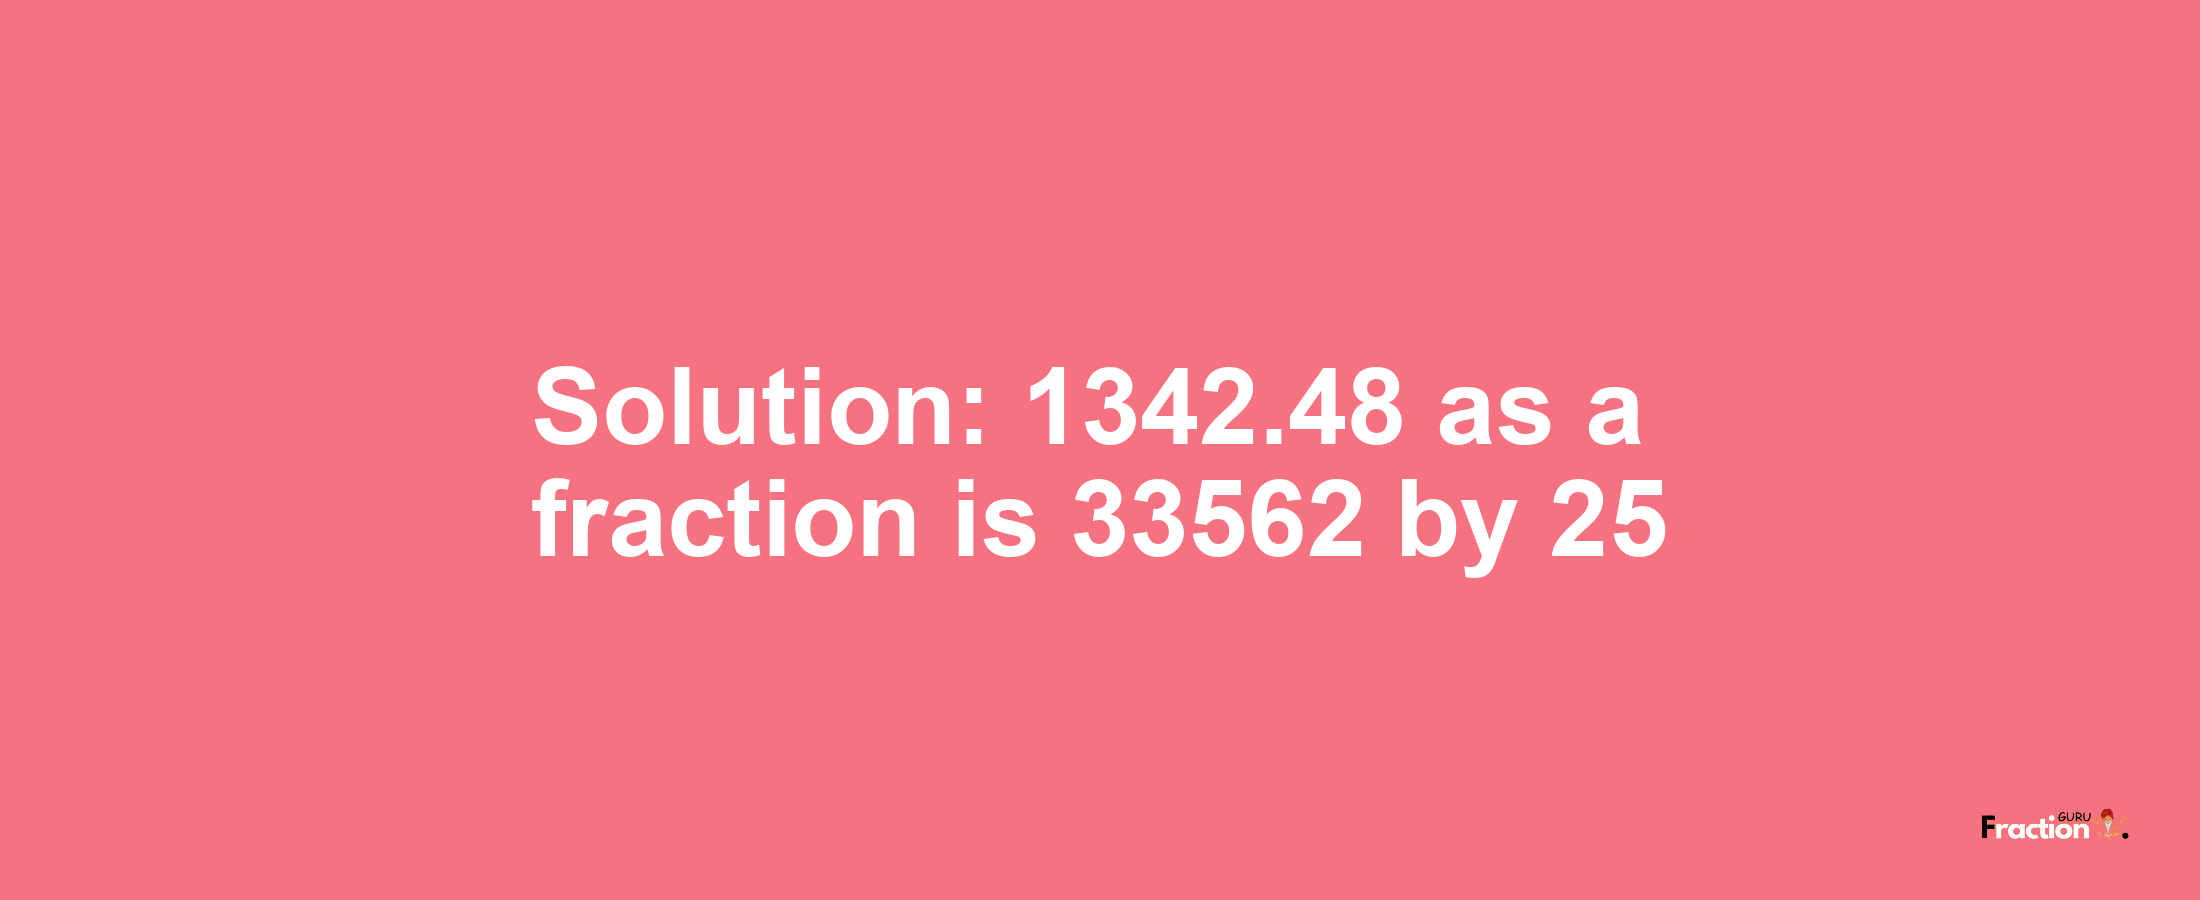 Solution:1342.48 as a fraction is 33562/25